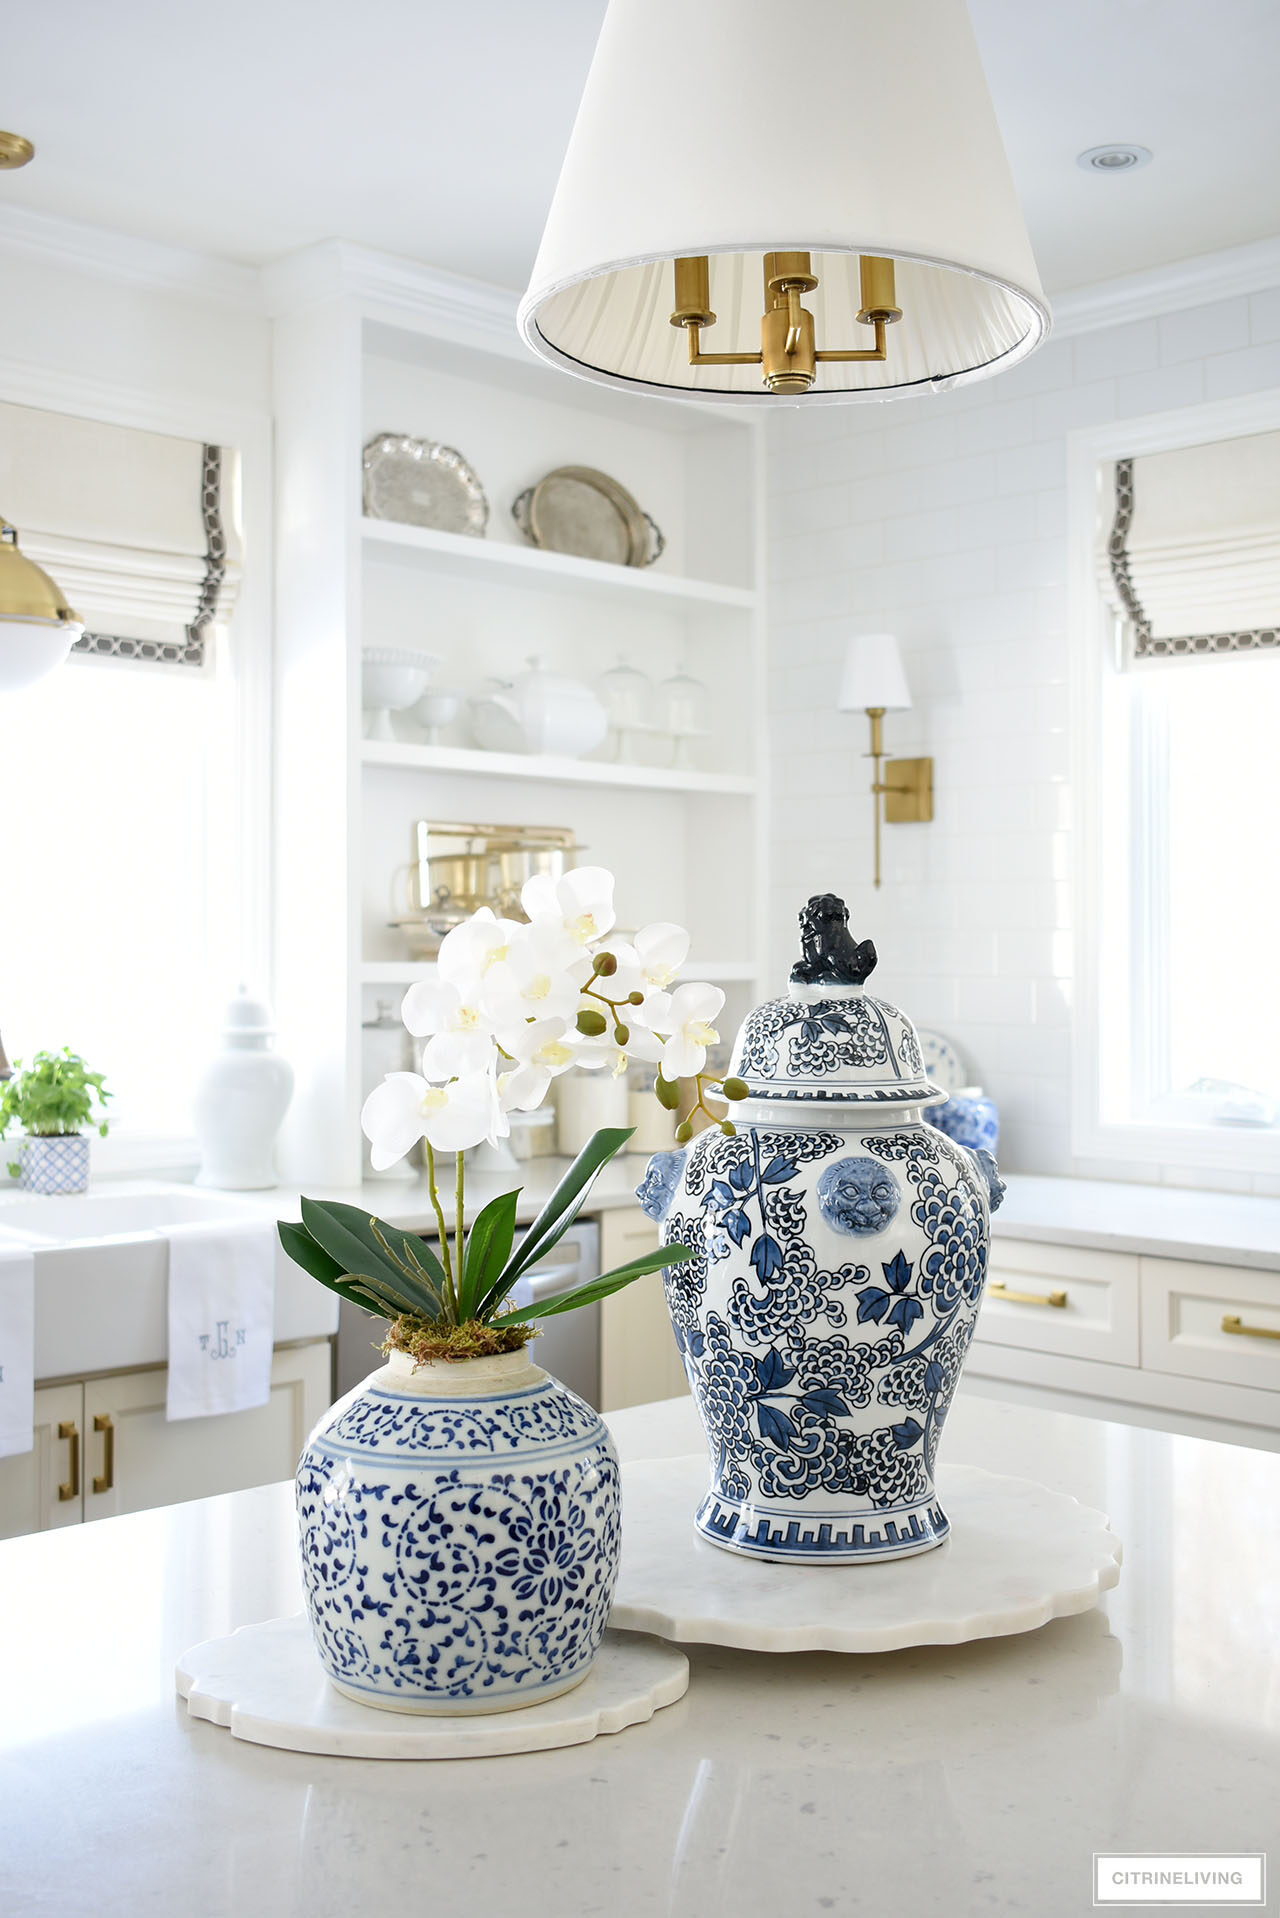 Kitchen island decorated for spring with a large blue and white ginger jar and an elegant orchid arrangement.